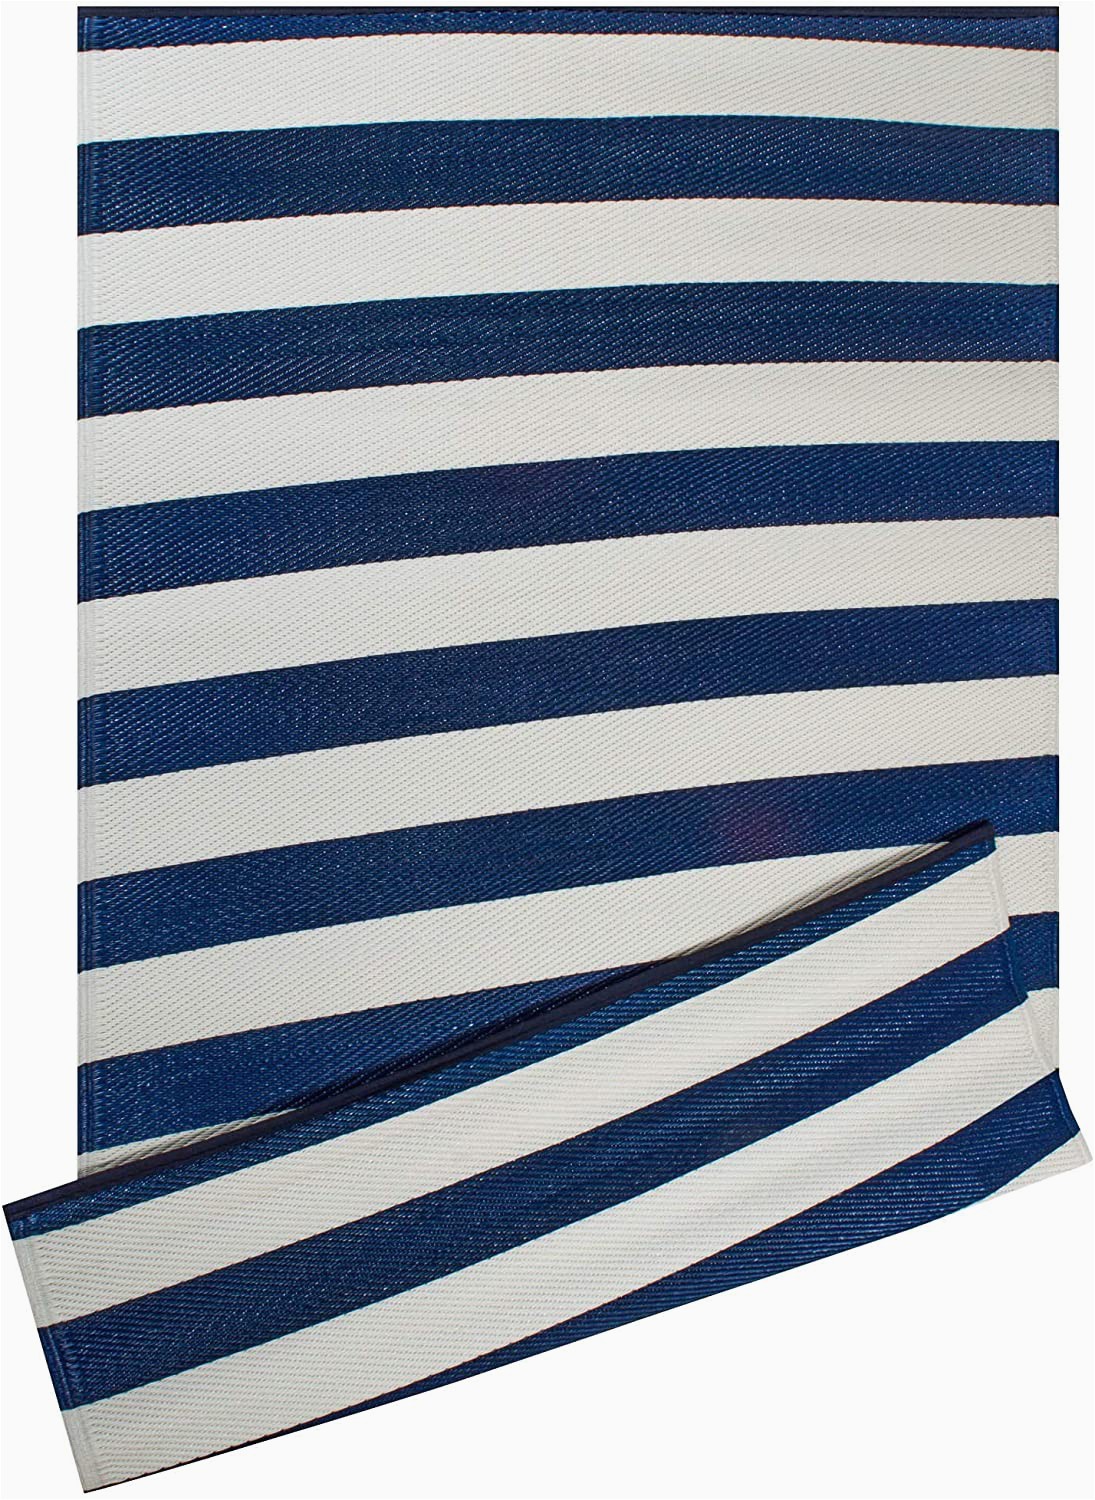 Blue White Outdoor Rug Dii Reversible Indoor Woven Striped Outdoor Rug 4×6 White & Navy